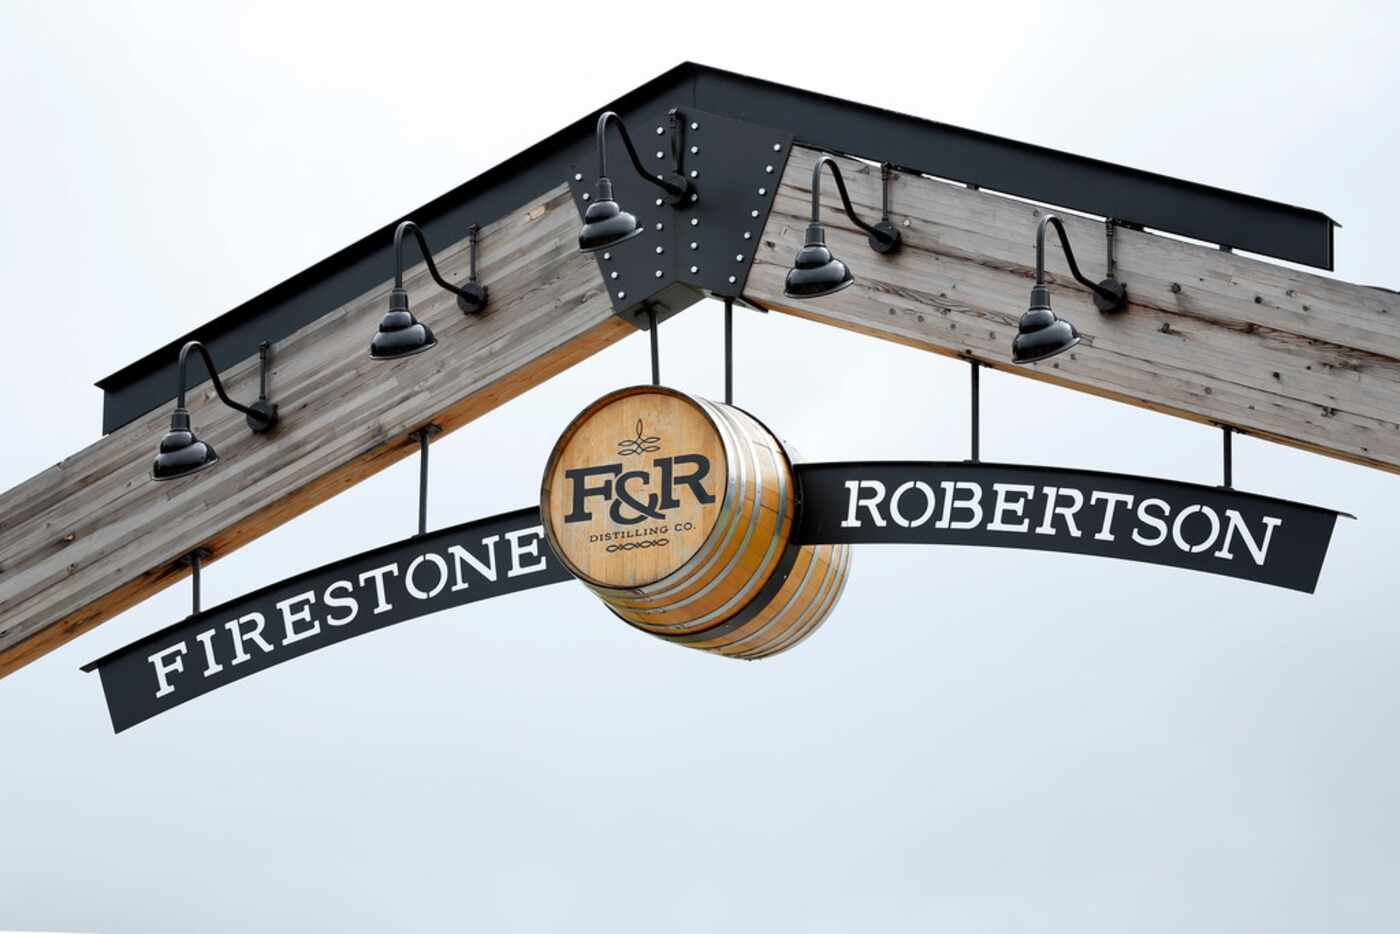 The entrance to Firestone & Robertson Distilling Co. in Fort Worth